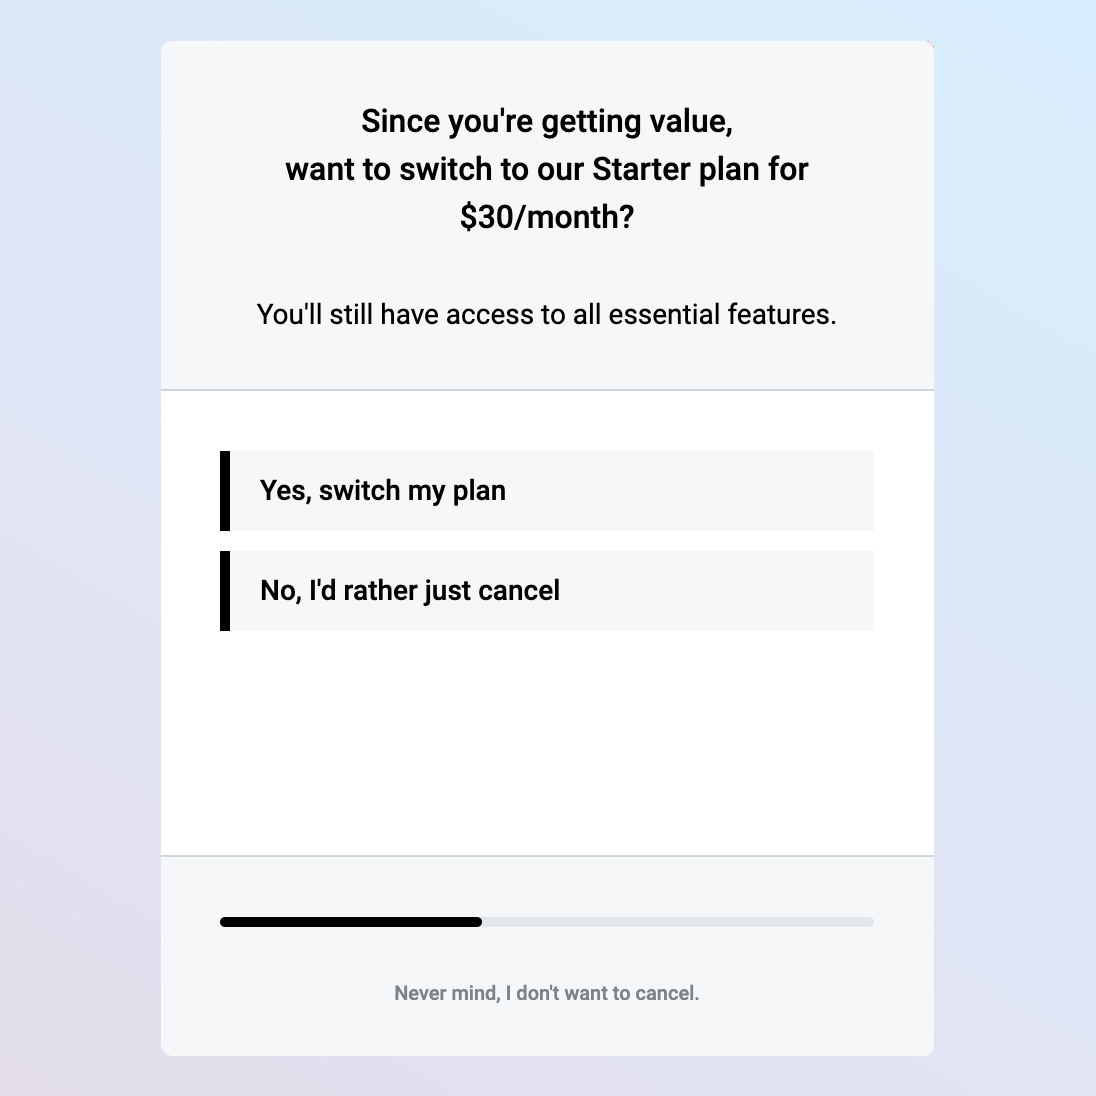 Retain Cancellation Flow modal step 3. It says: Since you're getting value, want to switch to our Starter plan for $30/month. The options are: yes, no.